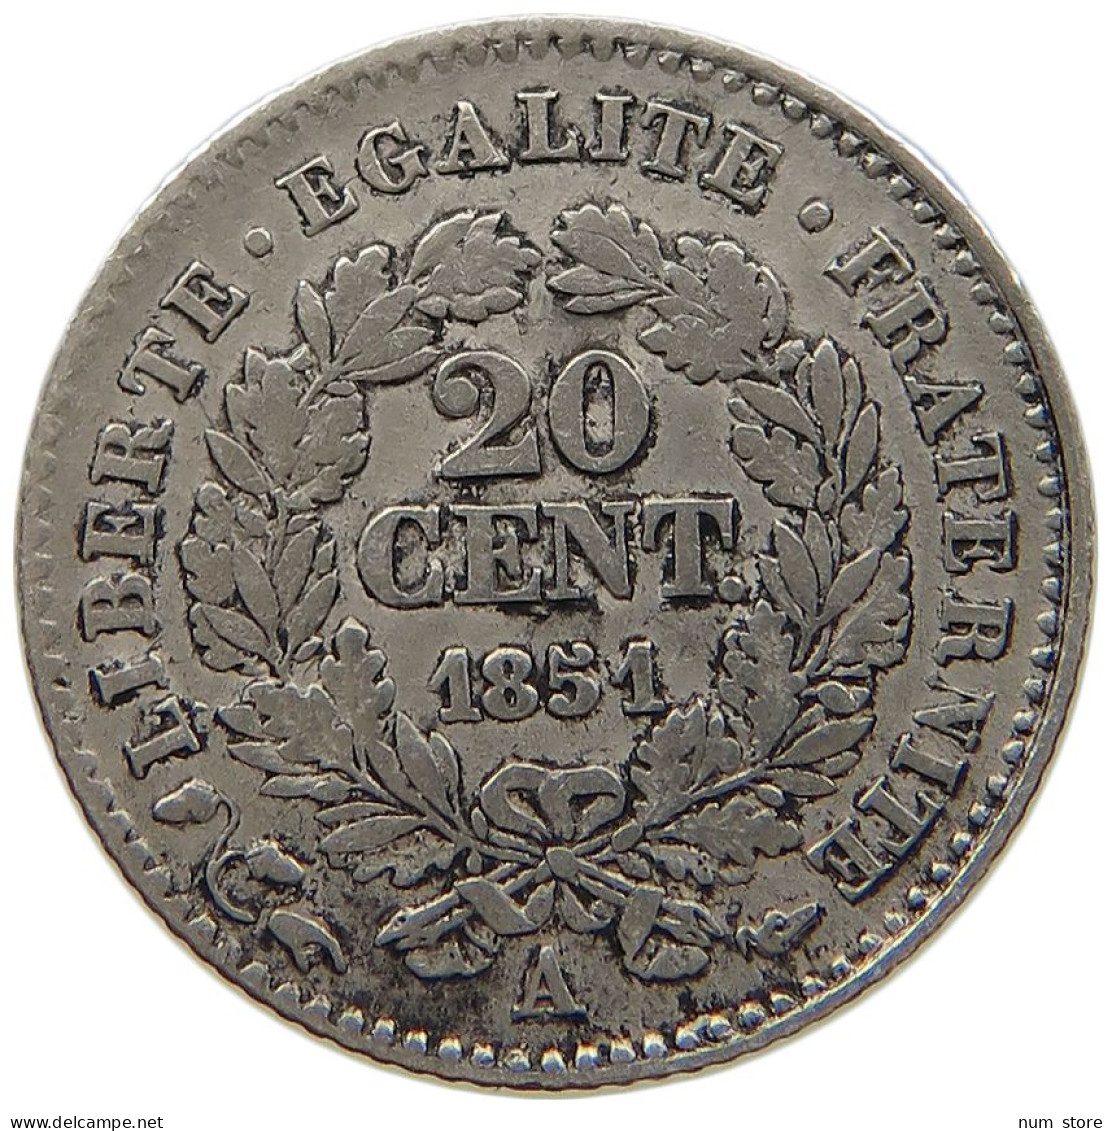 FRANCE 20 CENTIMES 1851 A  #MA 021242 - 20 Centimes